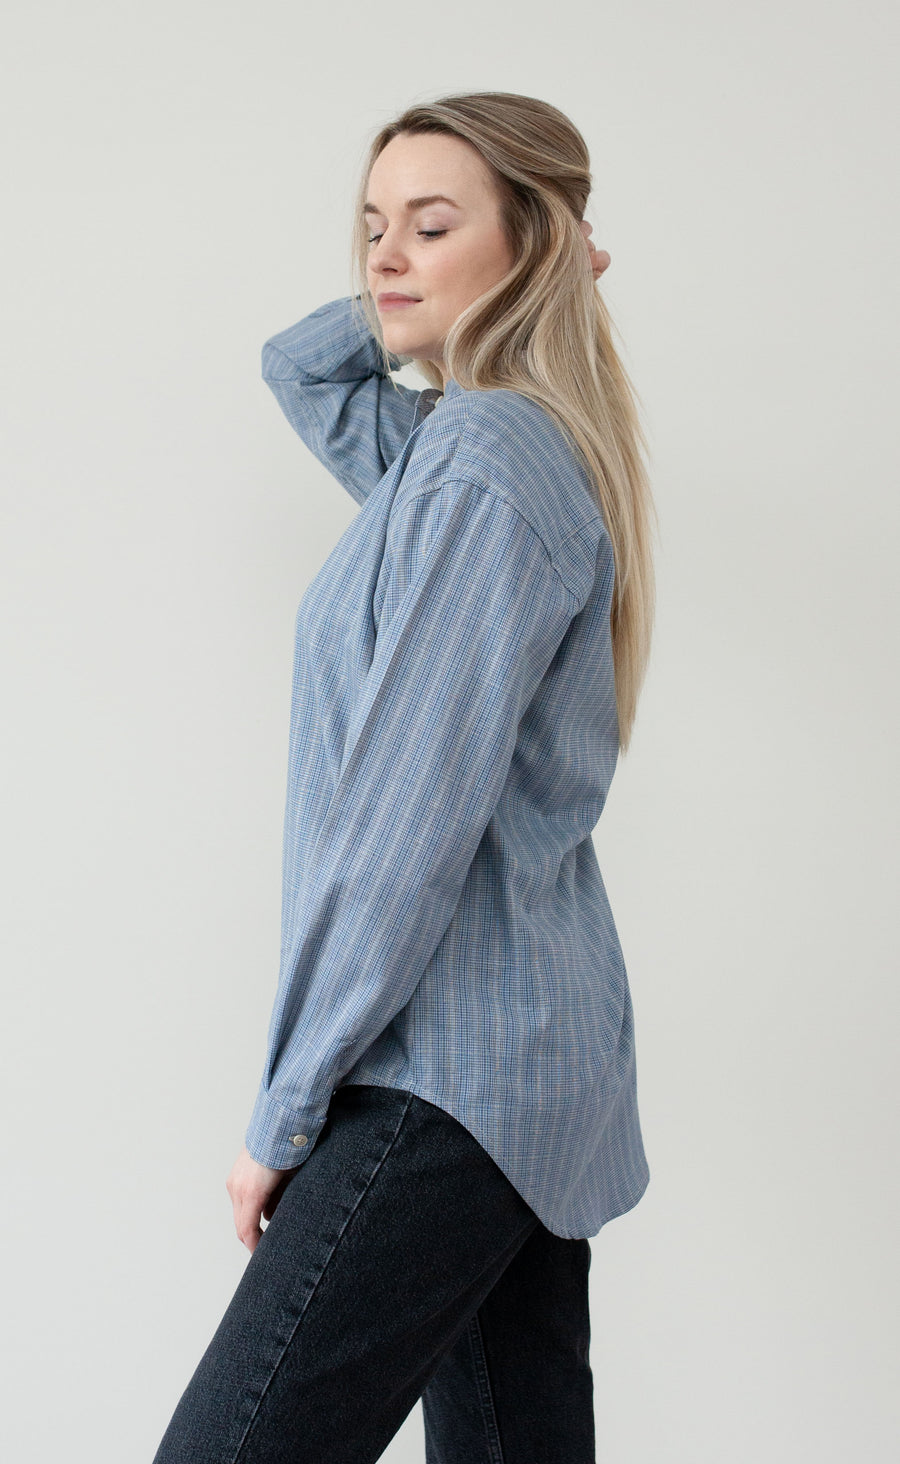 The Searcher - Wayward Fit Tunic - 100% Cotton